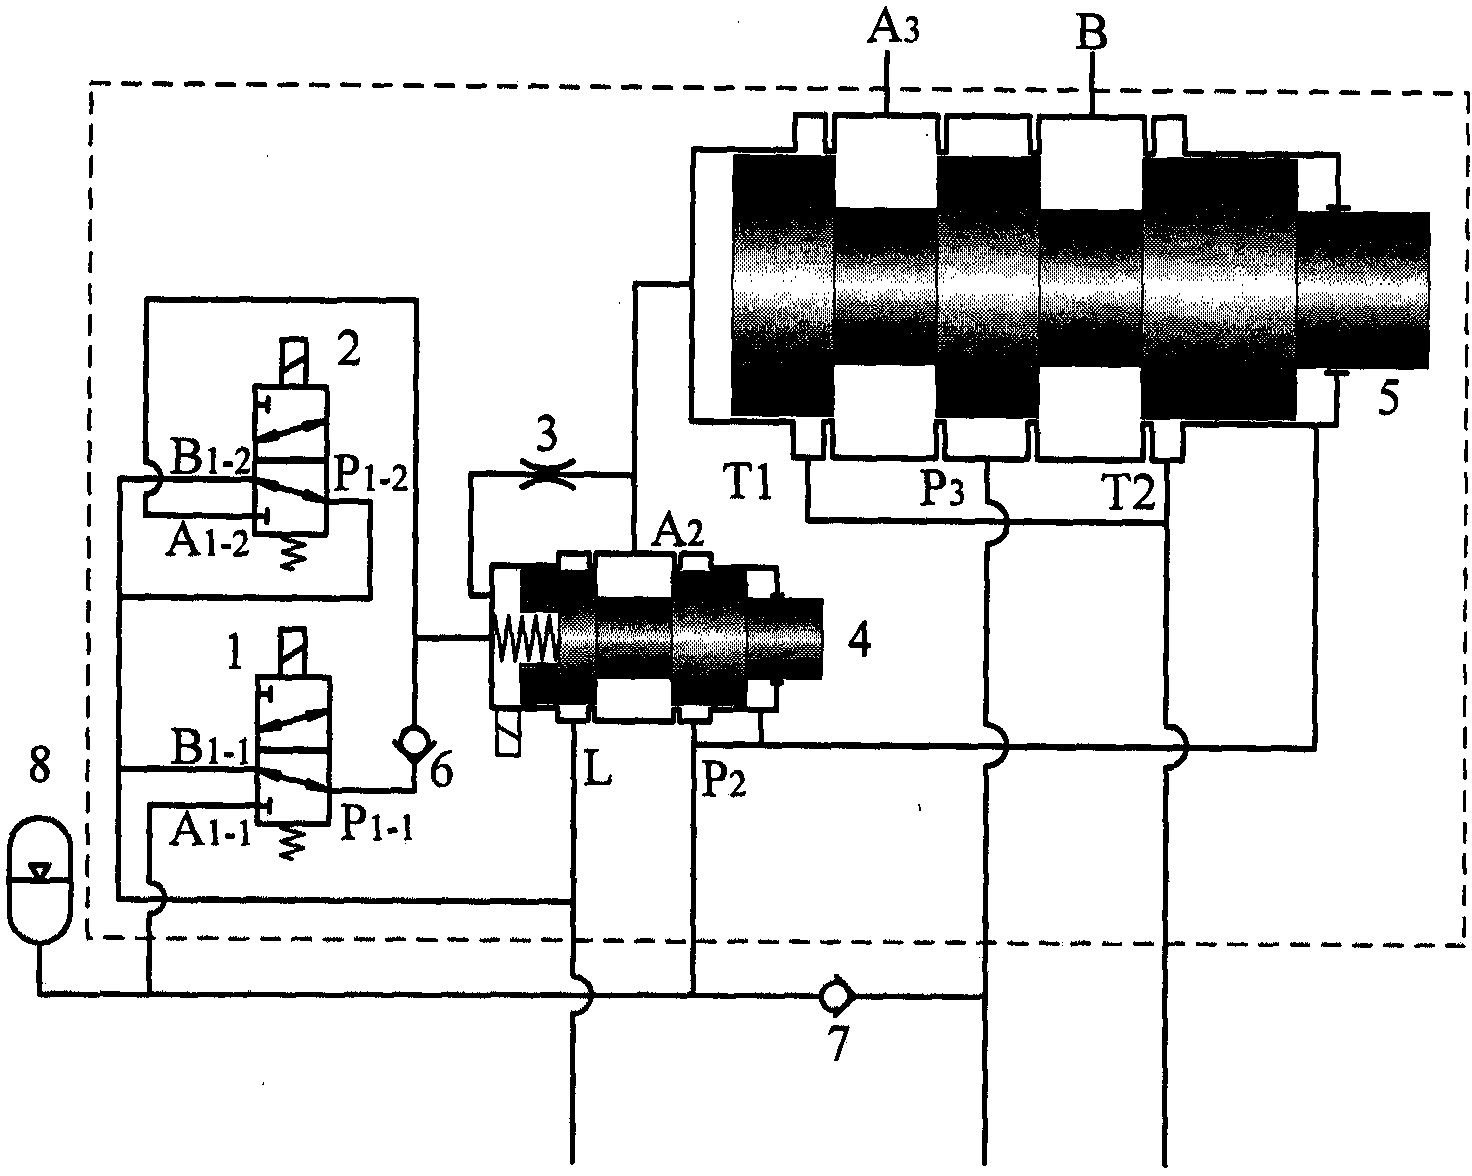 A bistable electro-hydraulic directional valve